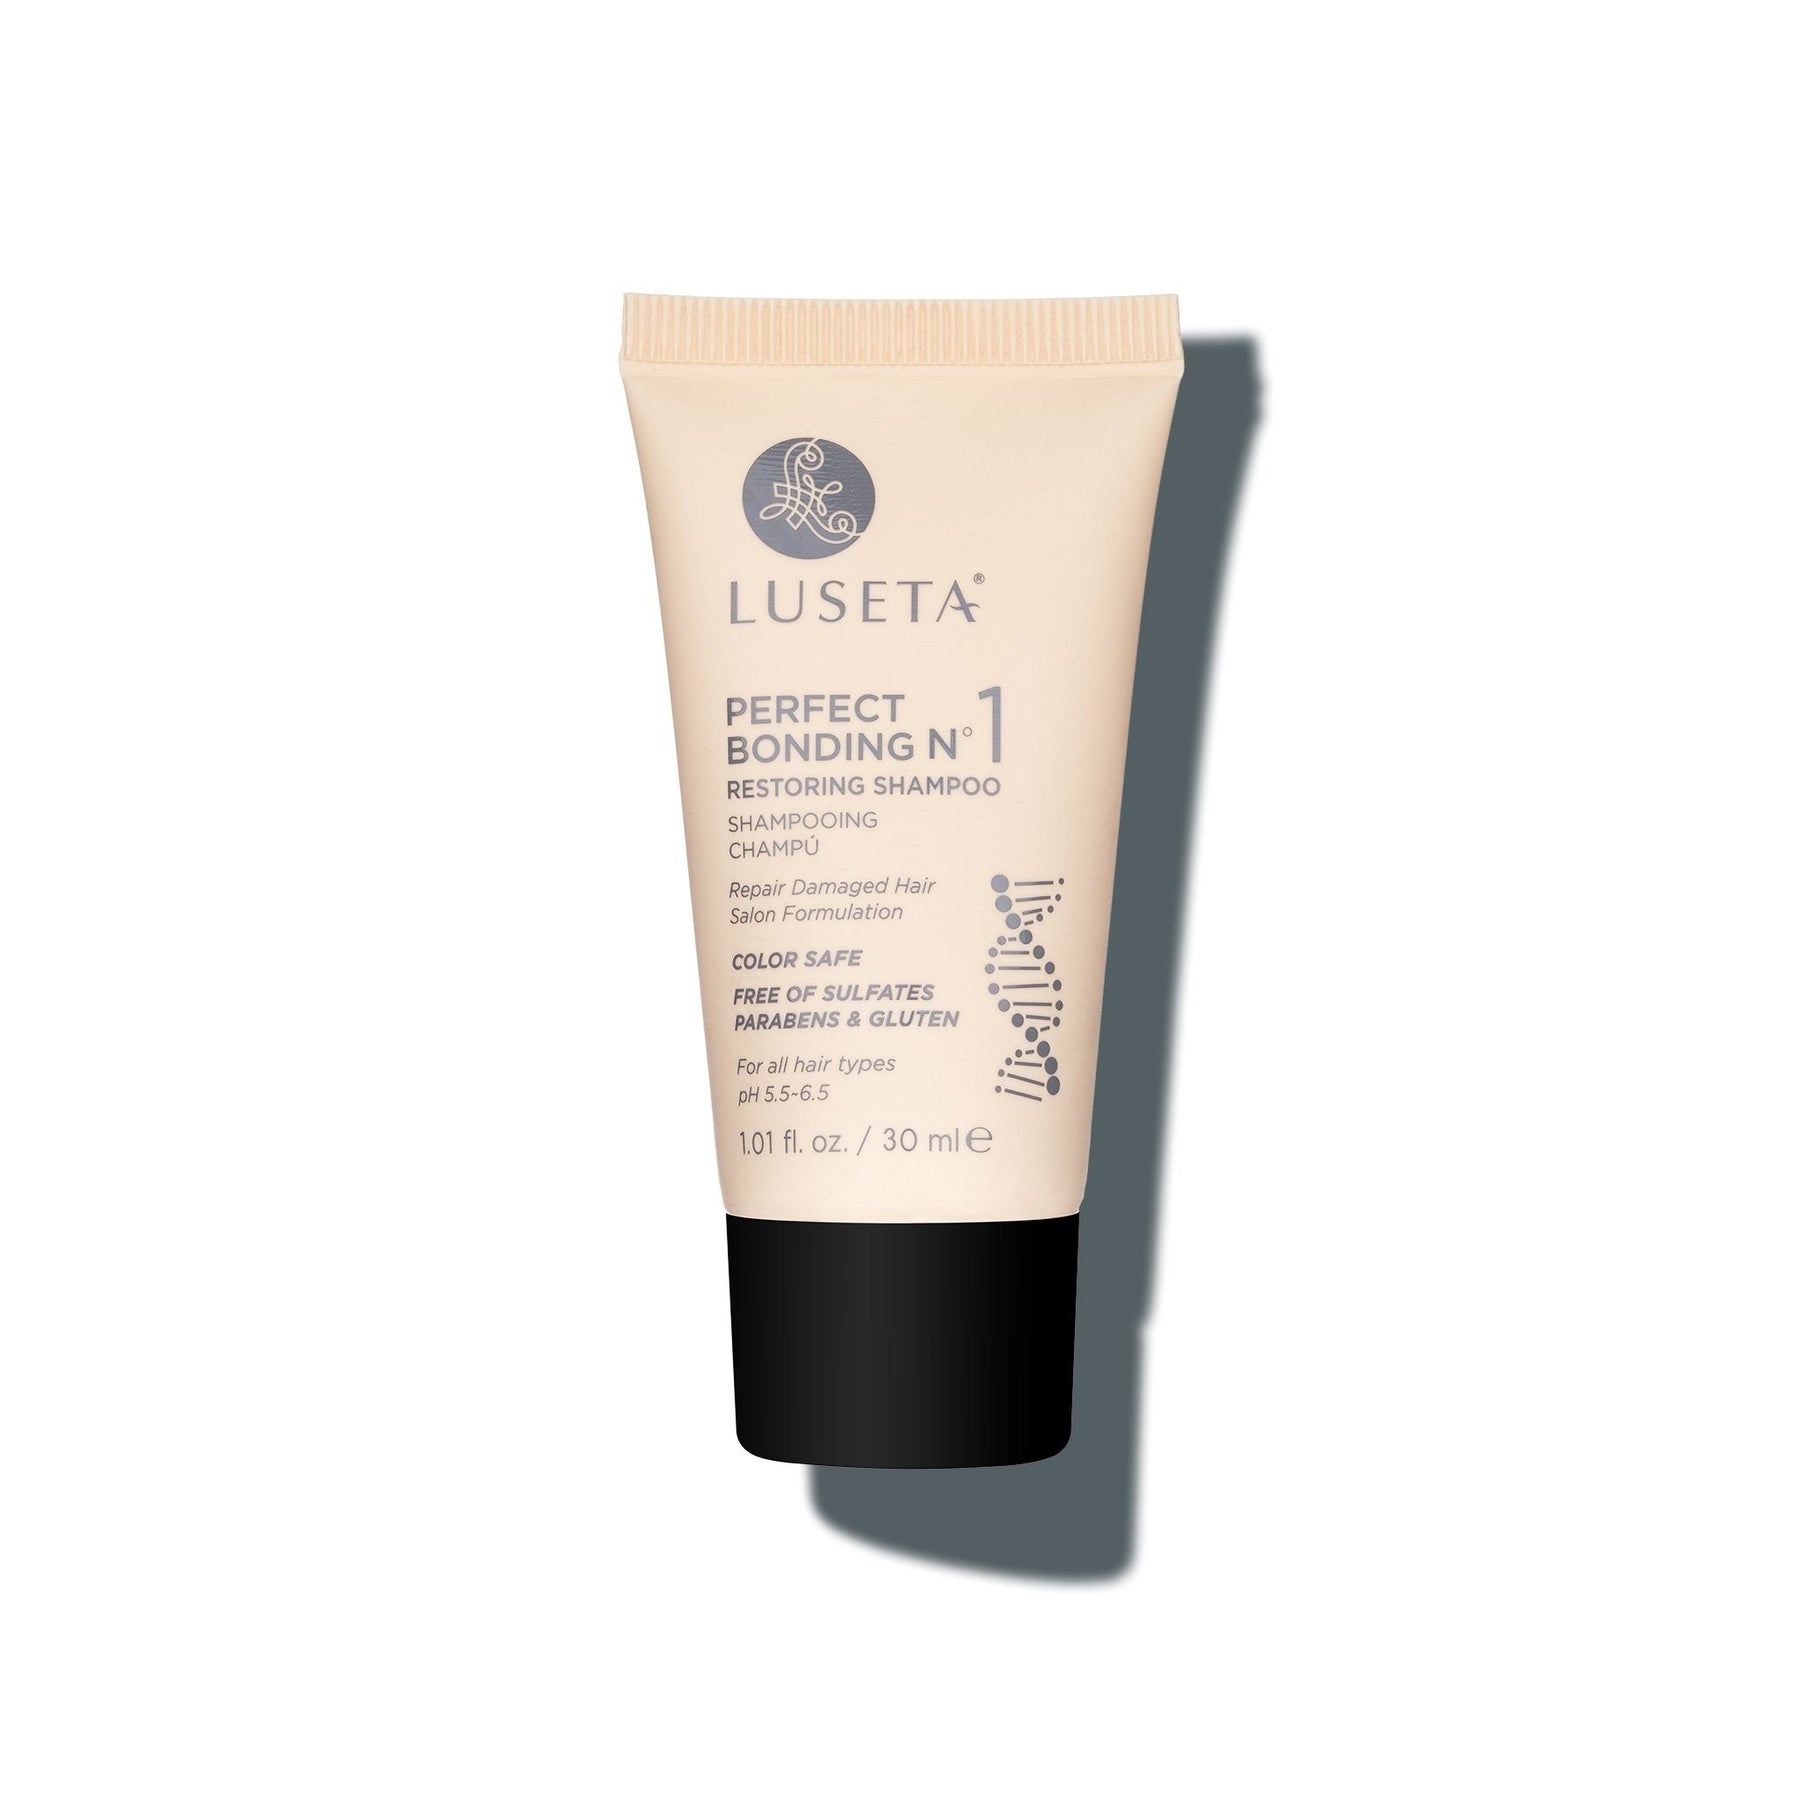 Perfect Bonding Restoring Shampoo - 1.01oz - by Luseta Beauty |ProCare Outlet|